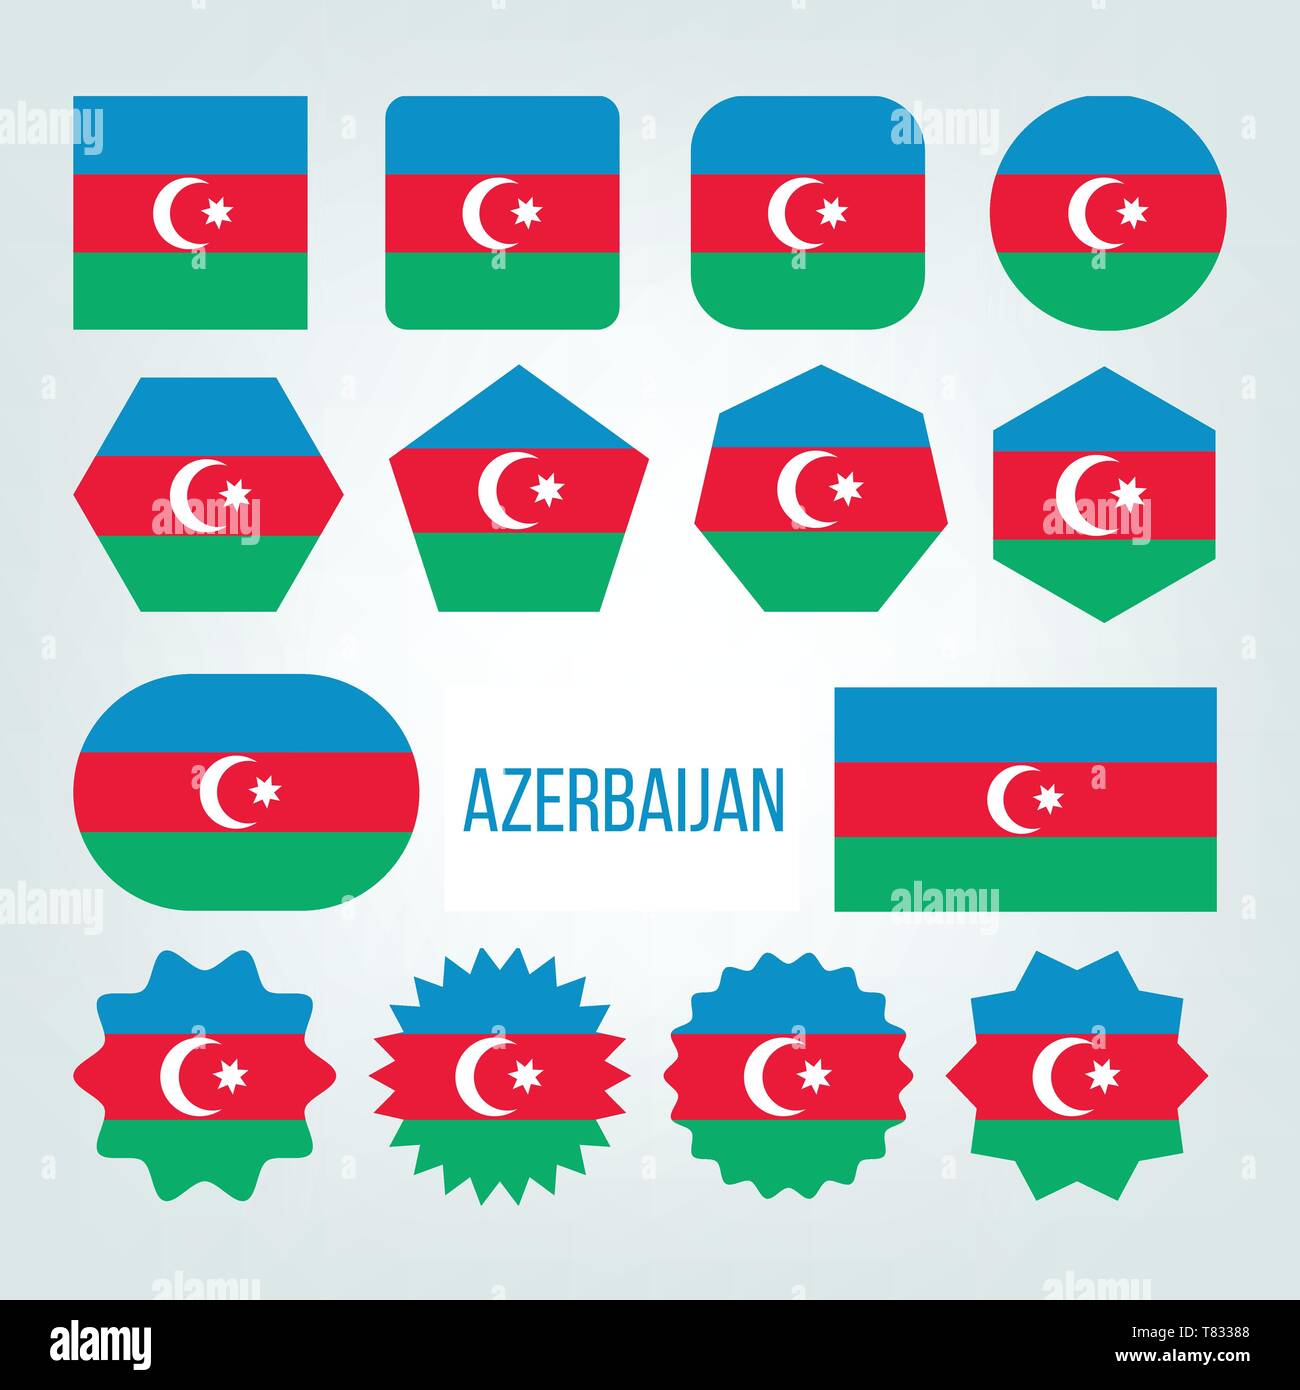 Azerbaijan Flag Collection Figure Icons Set Vector. Blue, Green And Red Color With Crescent And Eight-pointed Star Centered On National Symbol Of Repu Stock Vector